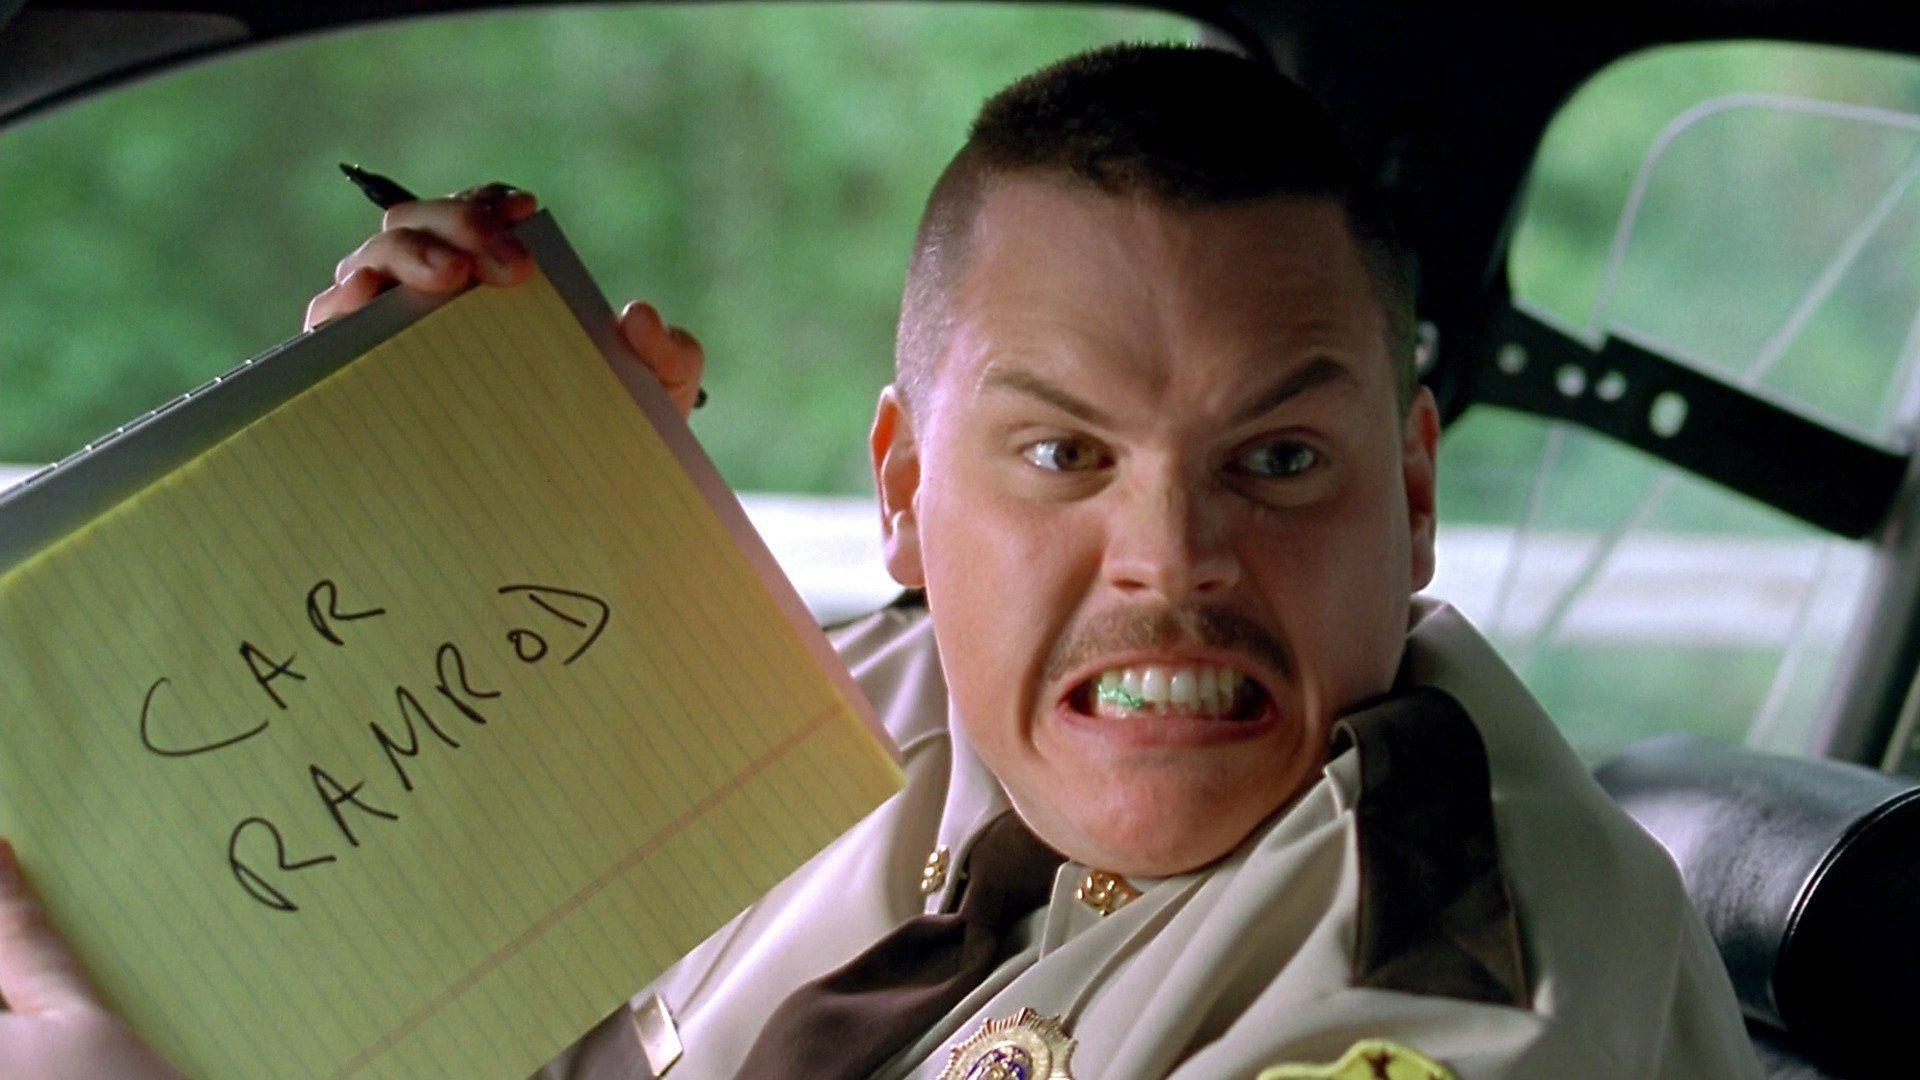 Super Troopers 2': Everything You Need to Know